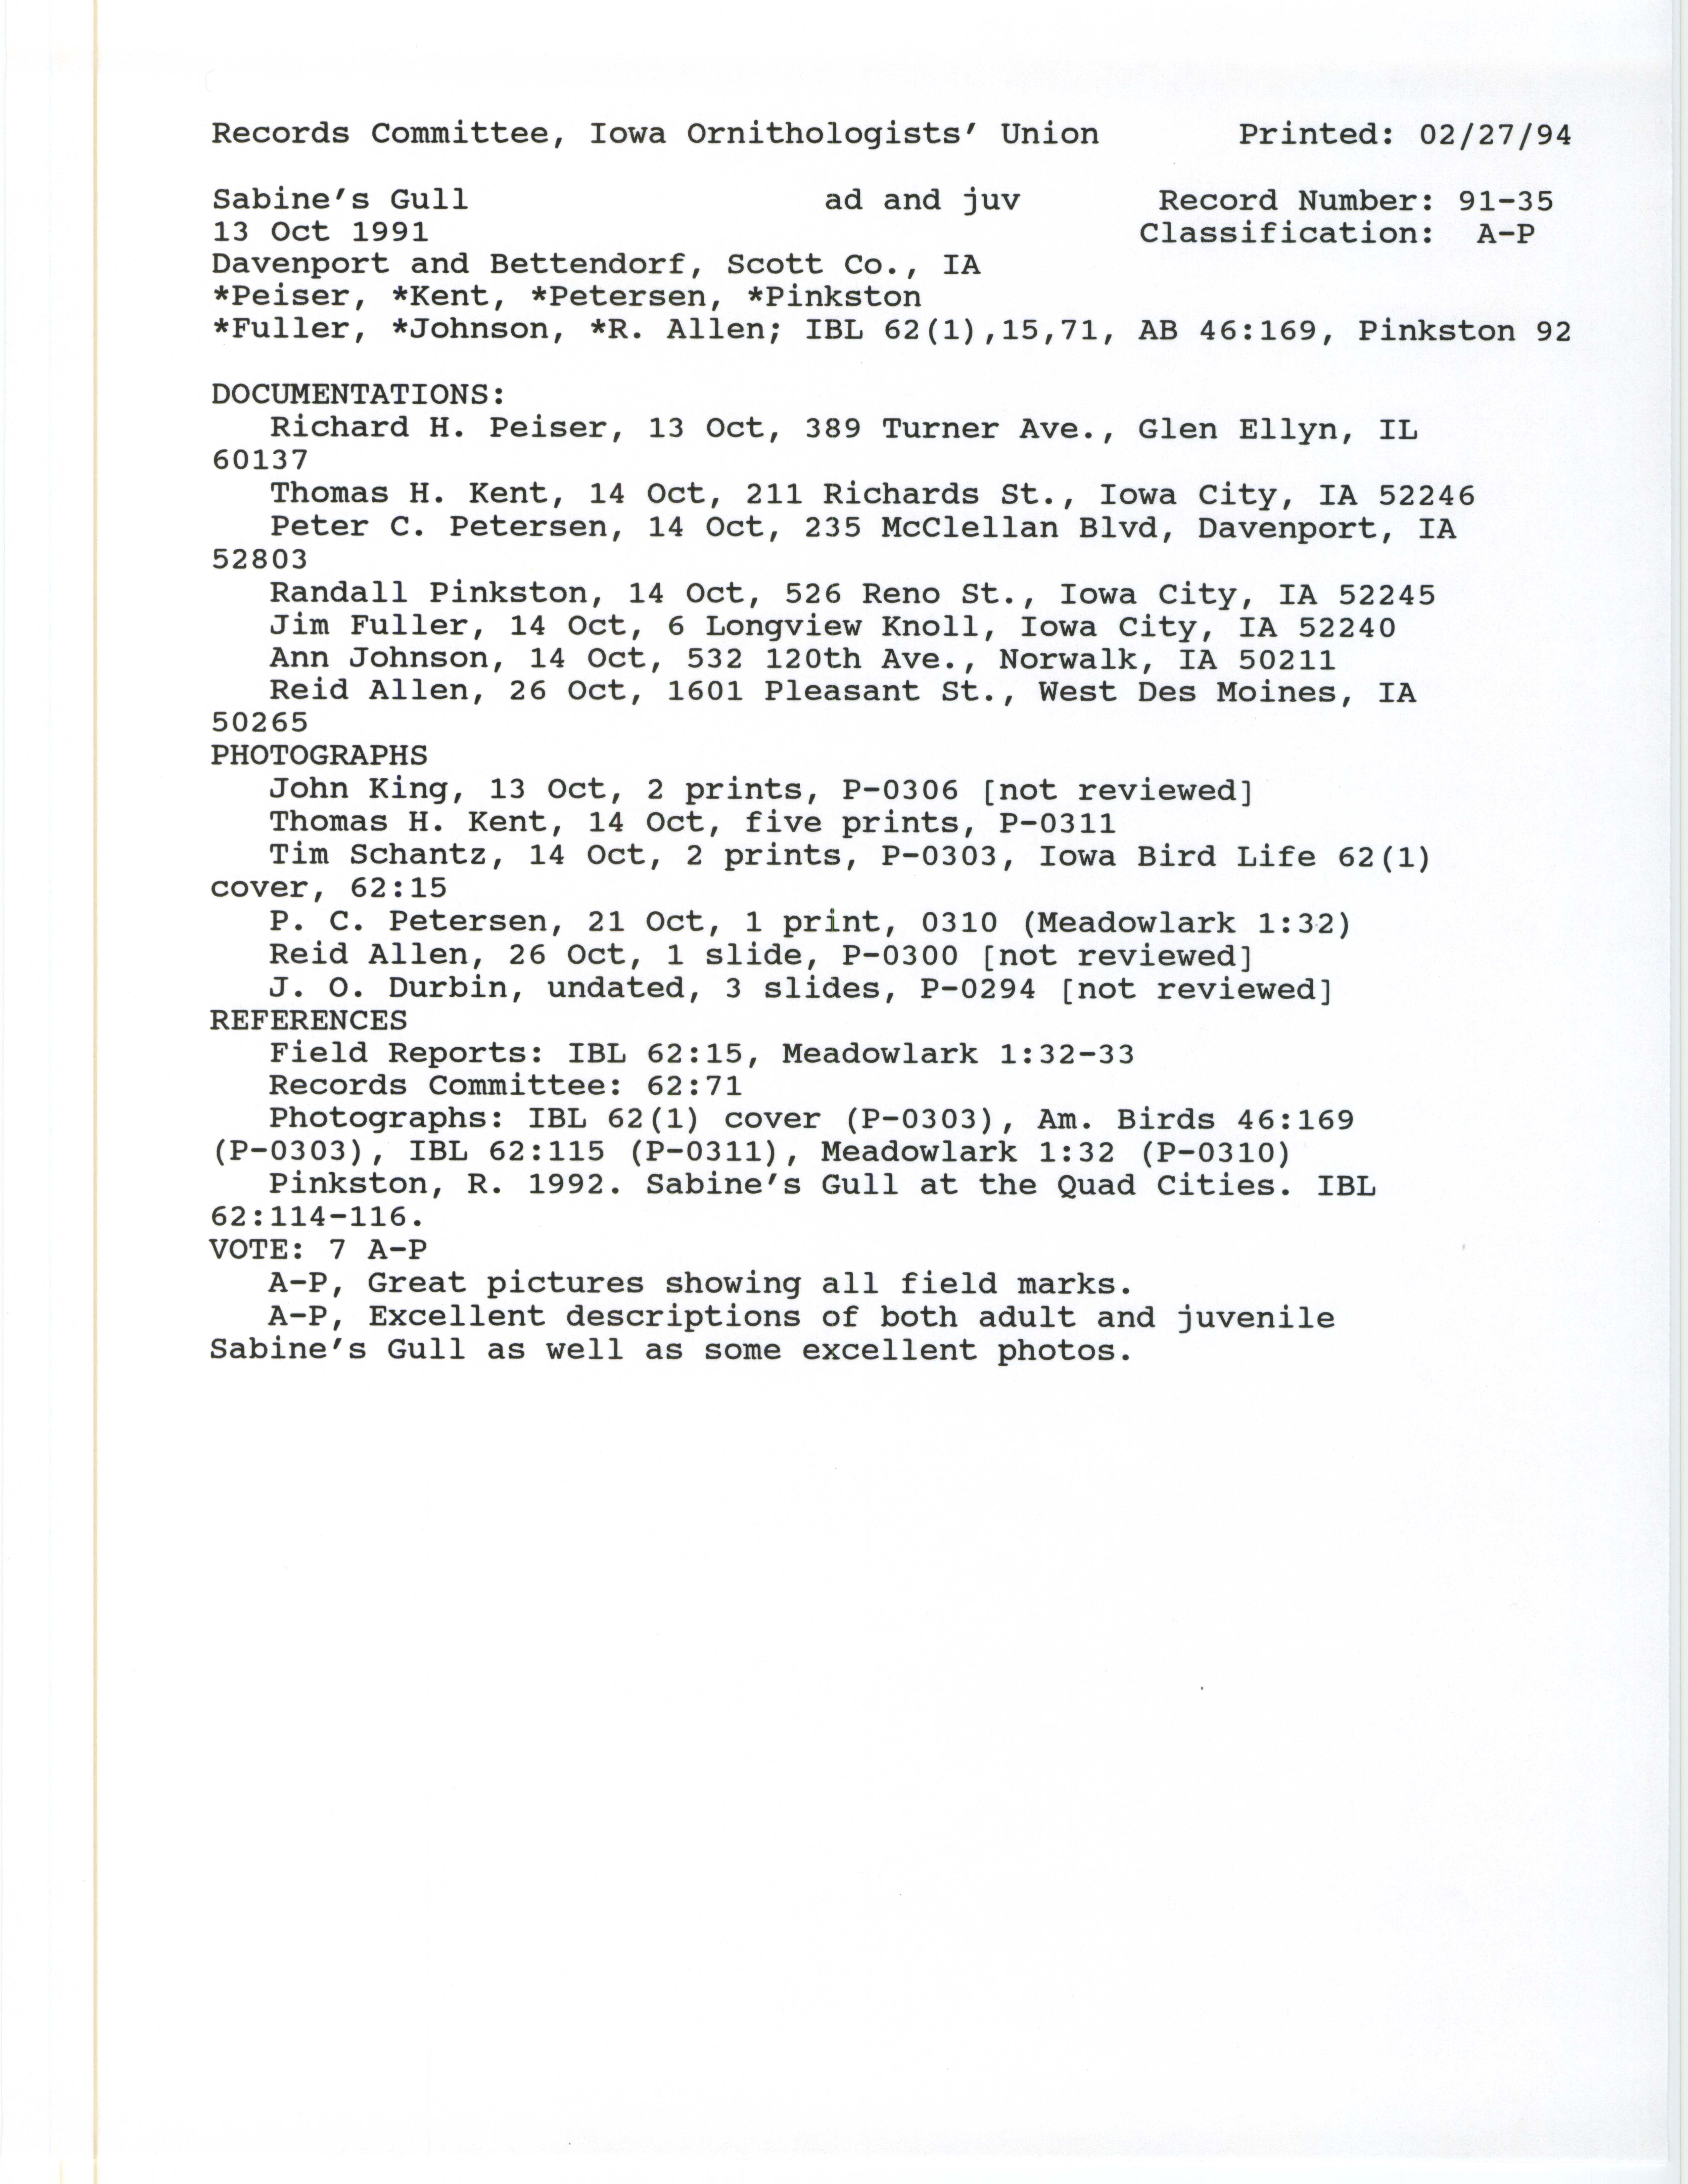 Records Committee review for rare bird sighting of Sabine's Gull at the riverfront of Davenport, 1991